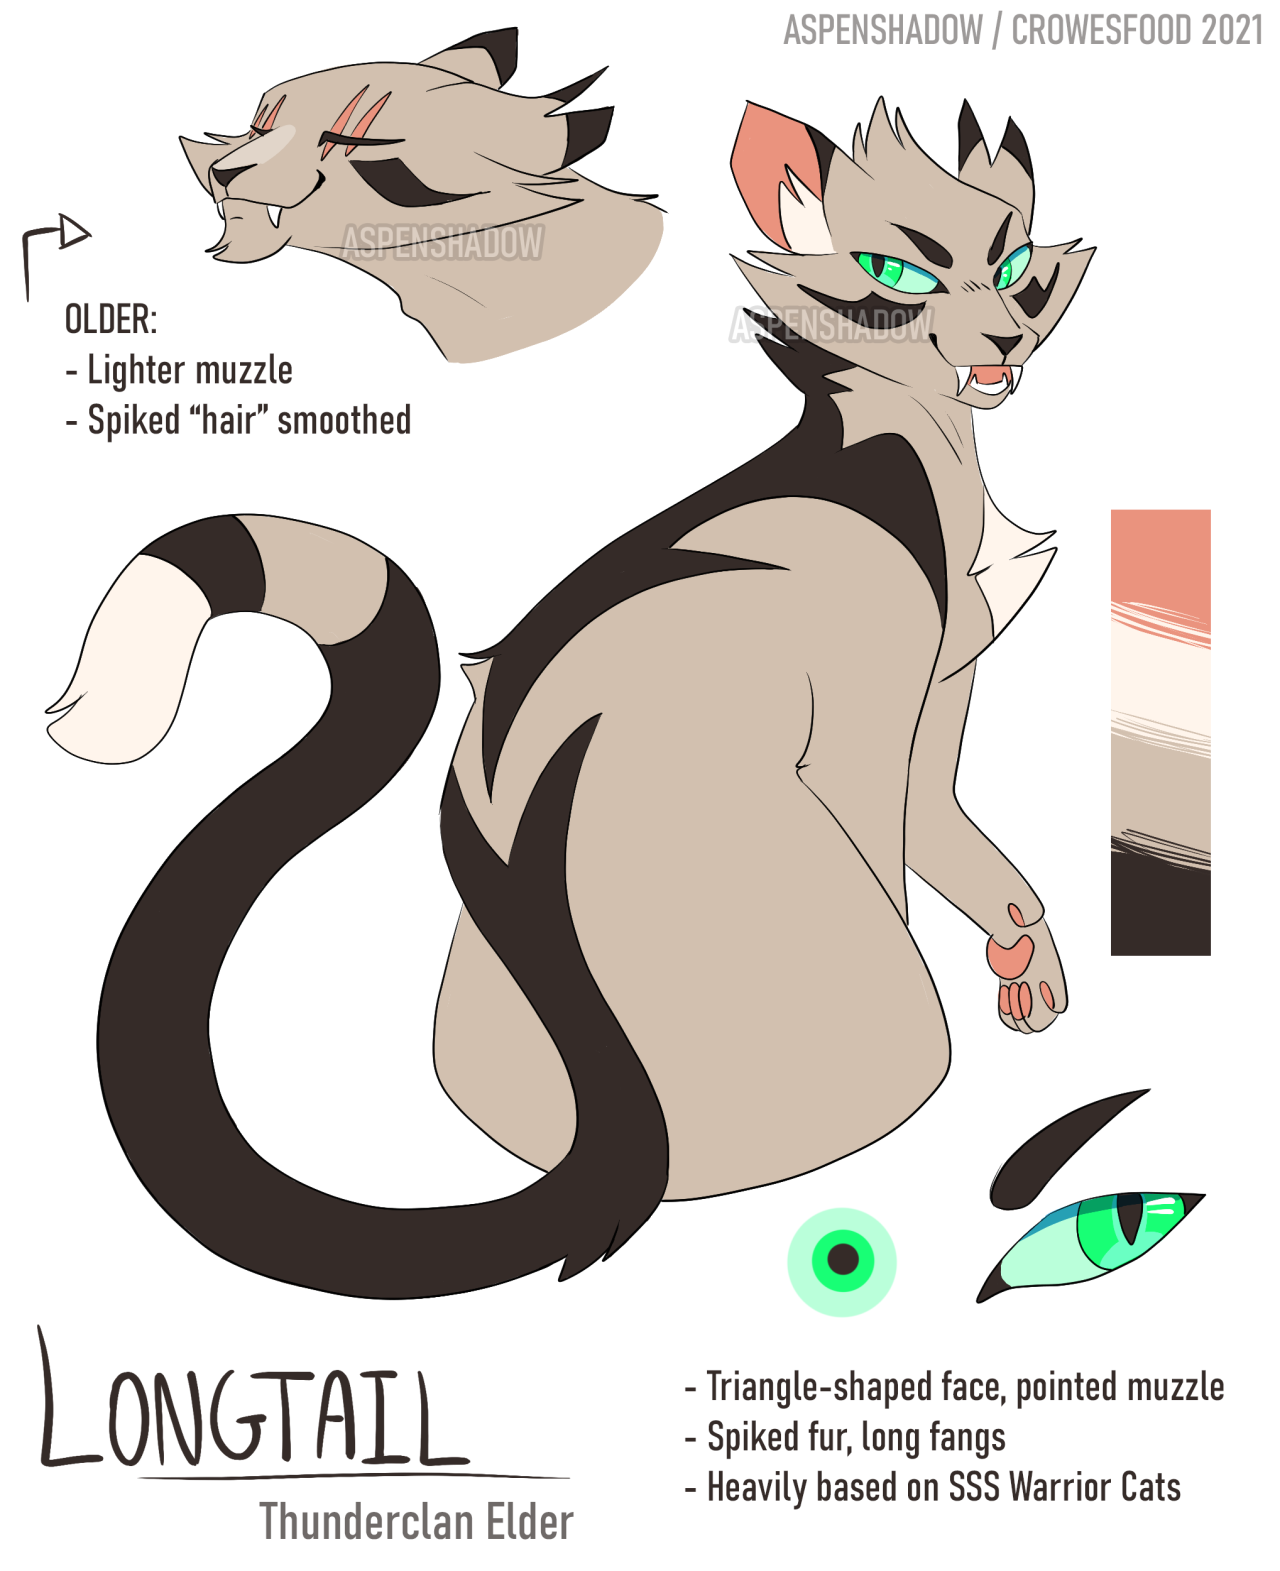 “Longtail
”
Requested by both Sagutoyas and dawntrigger!
The SSS Longtail has been the only design I’ve pictured since 2010 of Longtail, so my design is essentially a copy of theirs, which I’ll be transparent on. :’D It also takes inspiration from my...